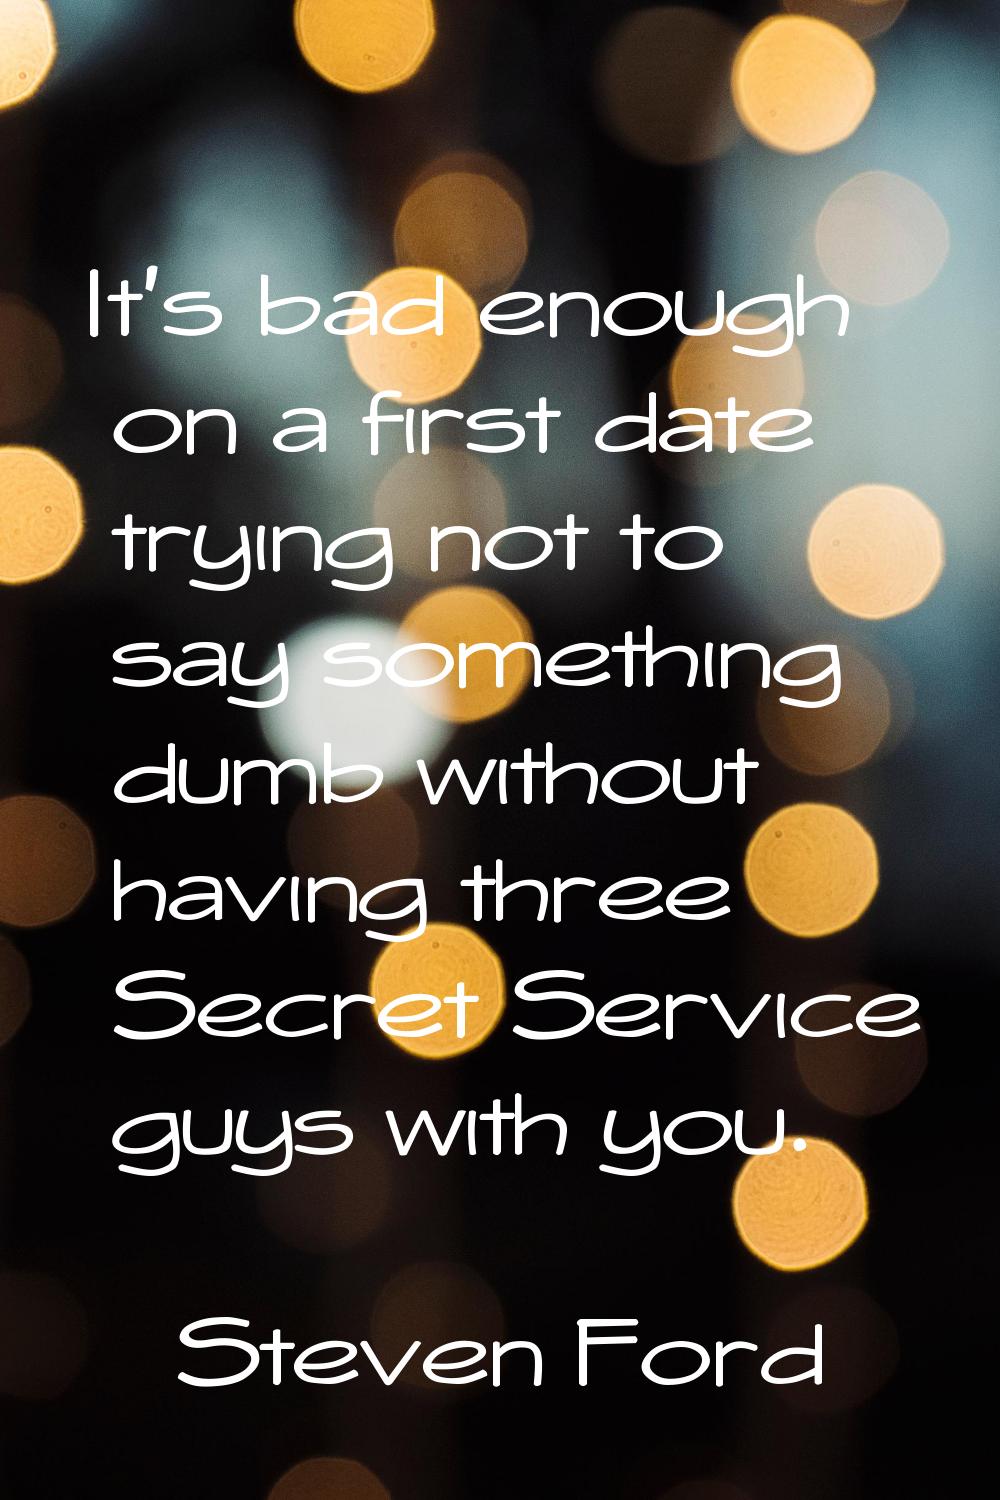 It's bad enough on a first date trying not to say something dumb without having three Secret Servic